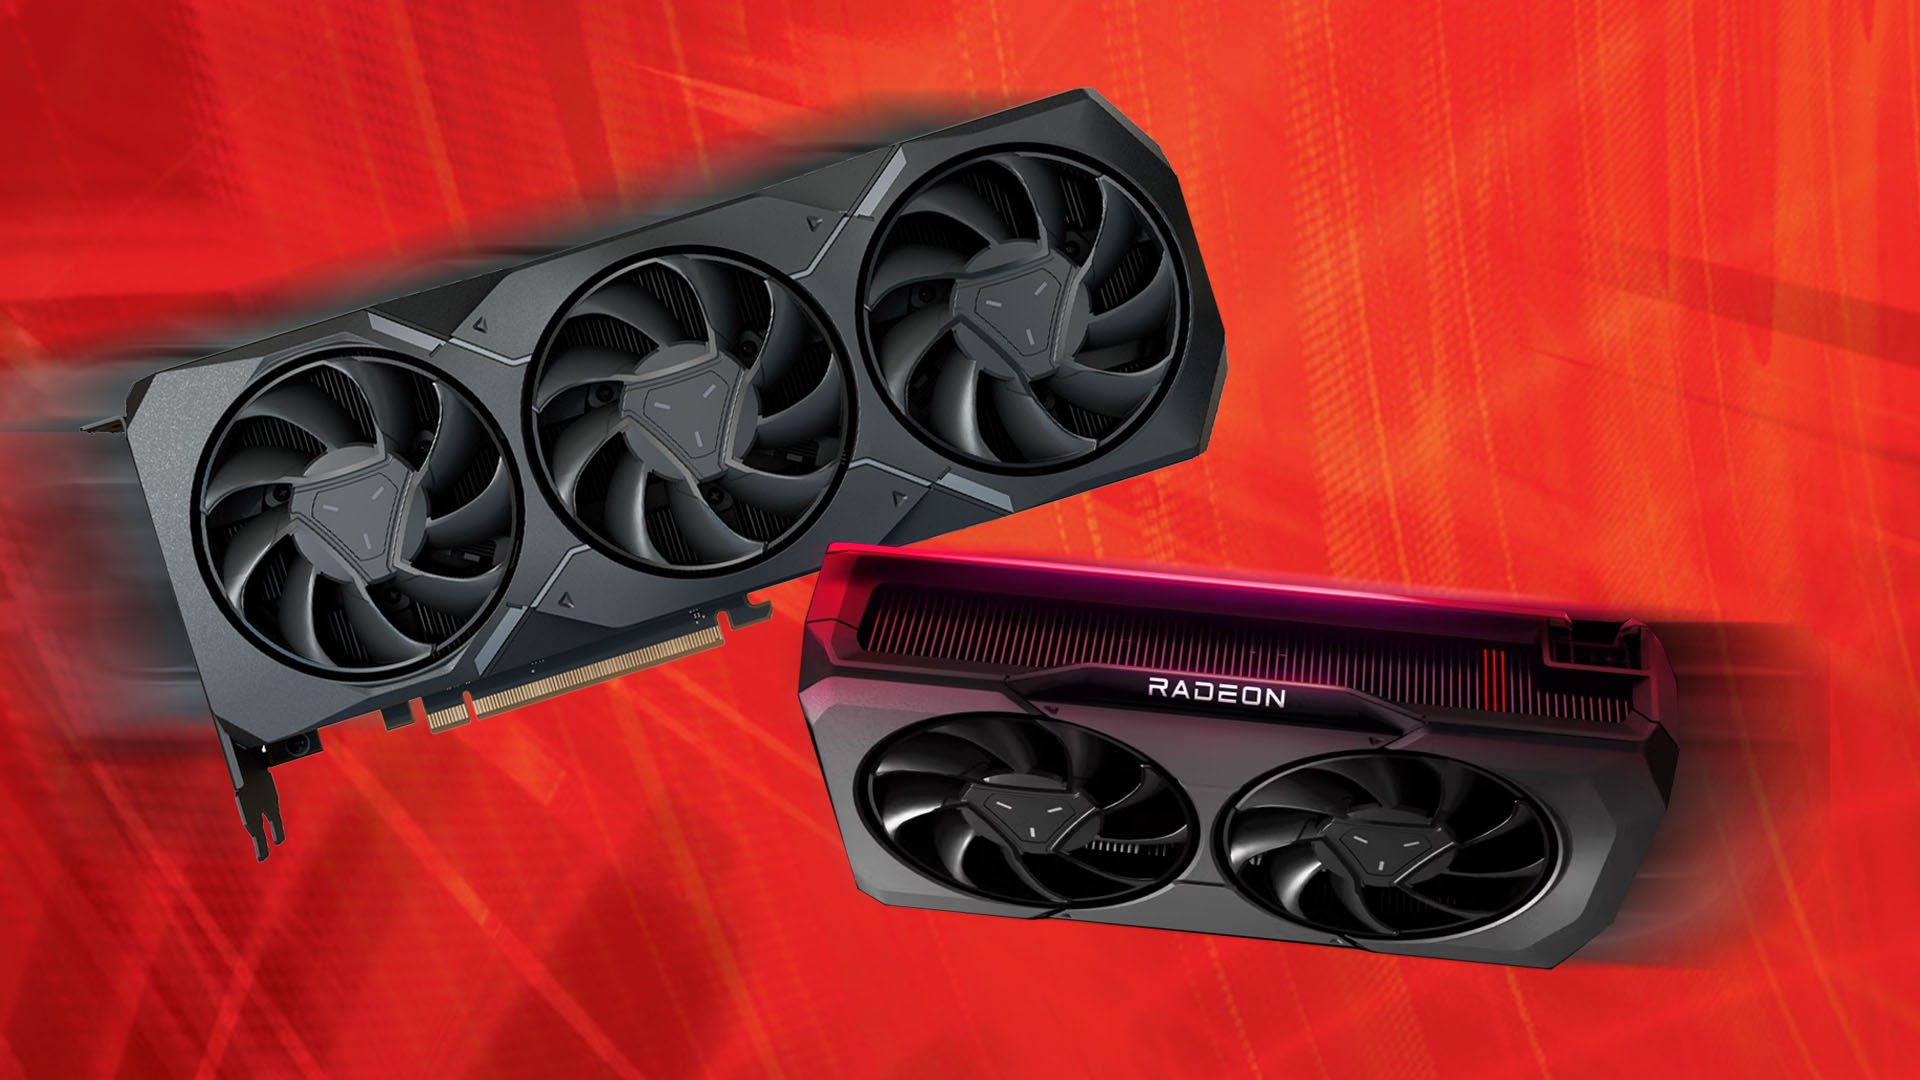 AMD Rumored To Launch Radeon RX 7800 XT & RX 7700 XT GPUs In Late Q3